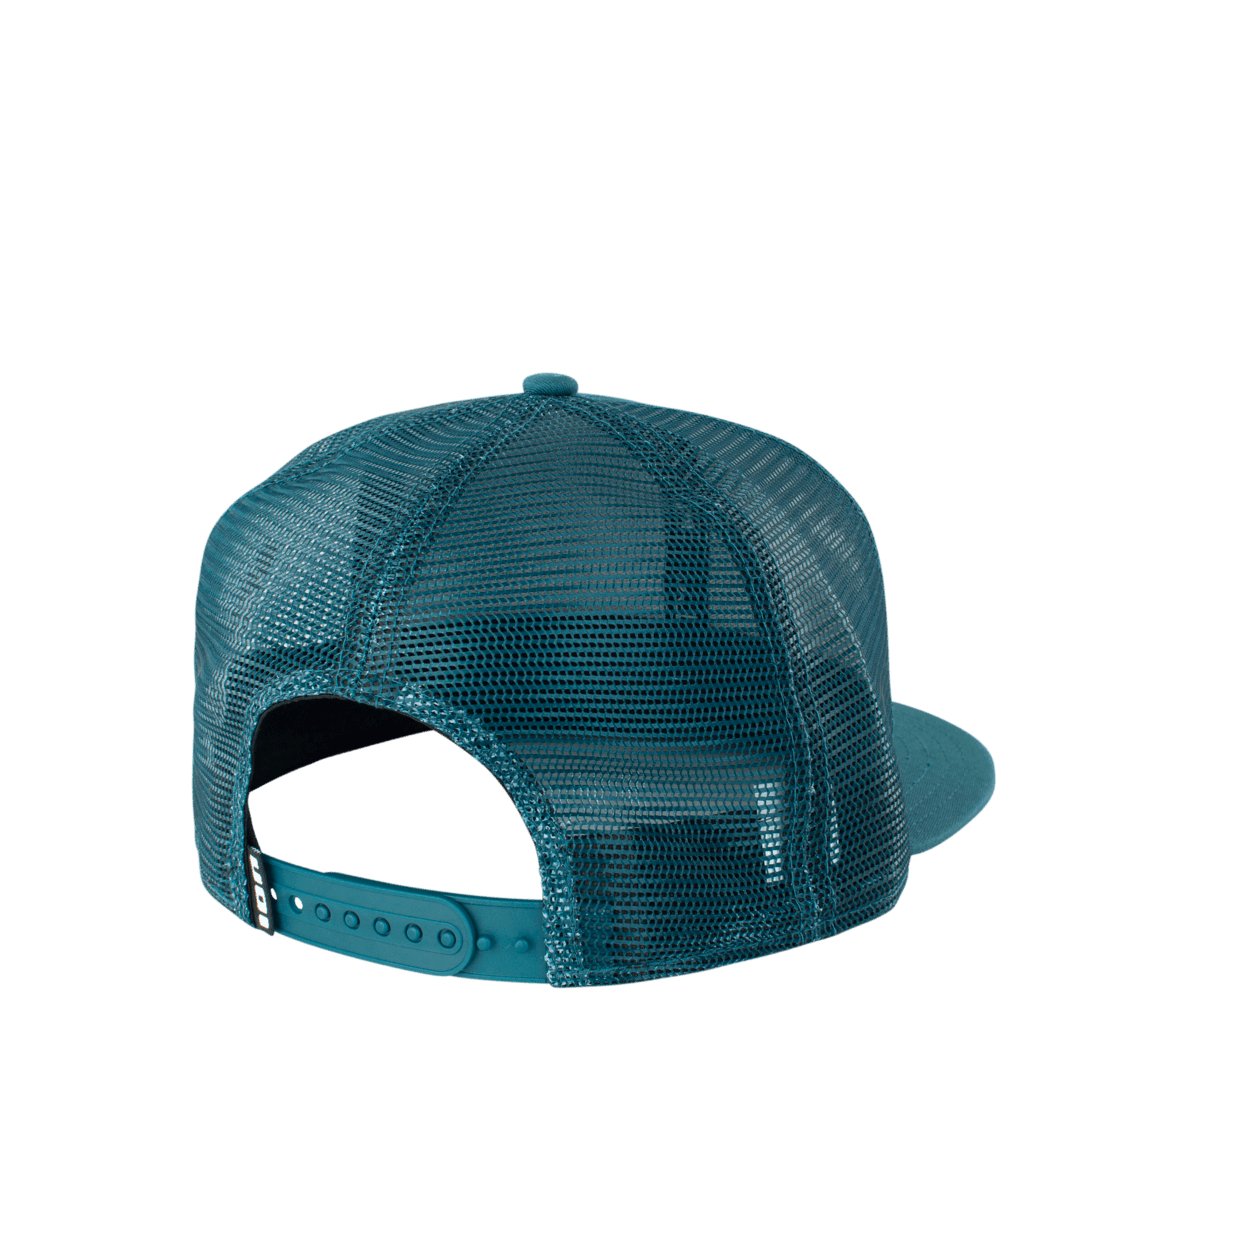 ION Cap Statement 2022 - Worthing Watersports - 9010583034492 - Apparel - ION Bike